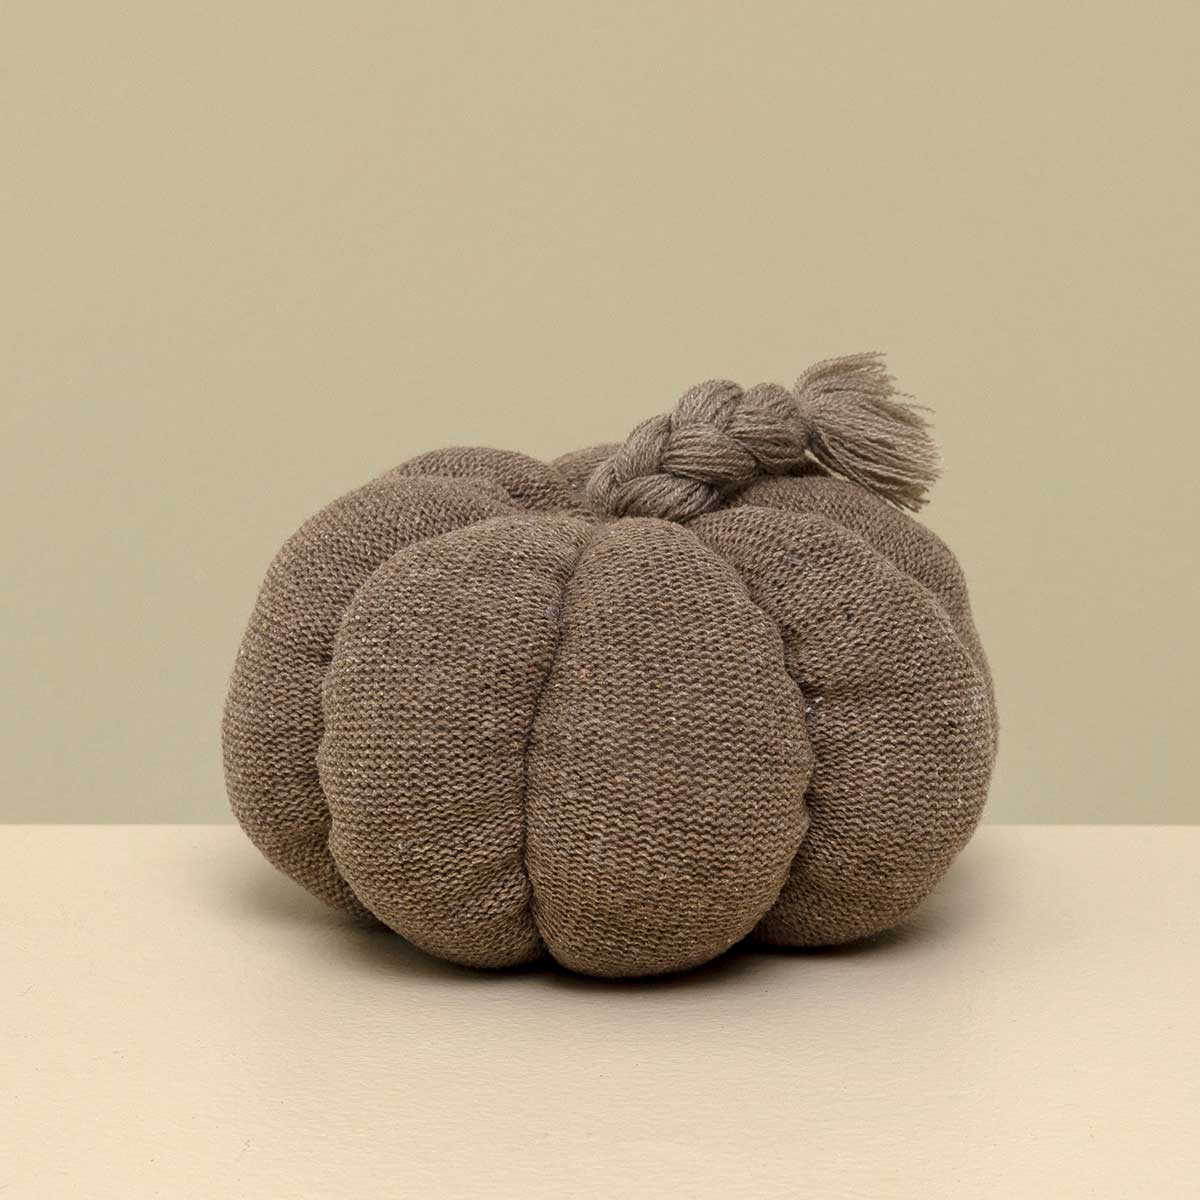 KNIT PUMPKIN PLUSH TAUPE WITH BRAIDED STEM LARGE 7"X4"